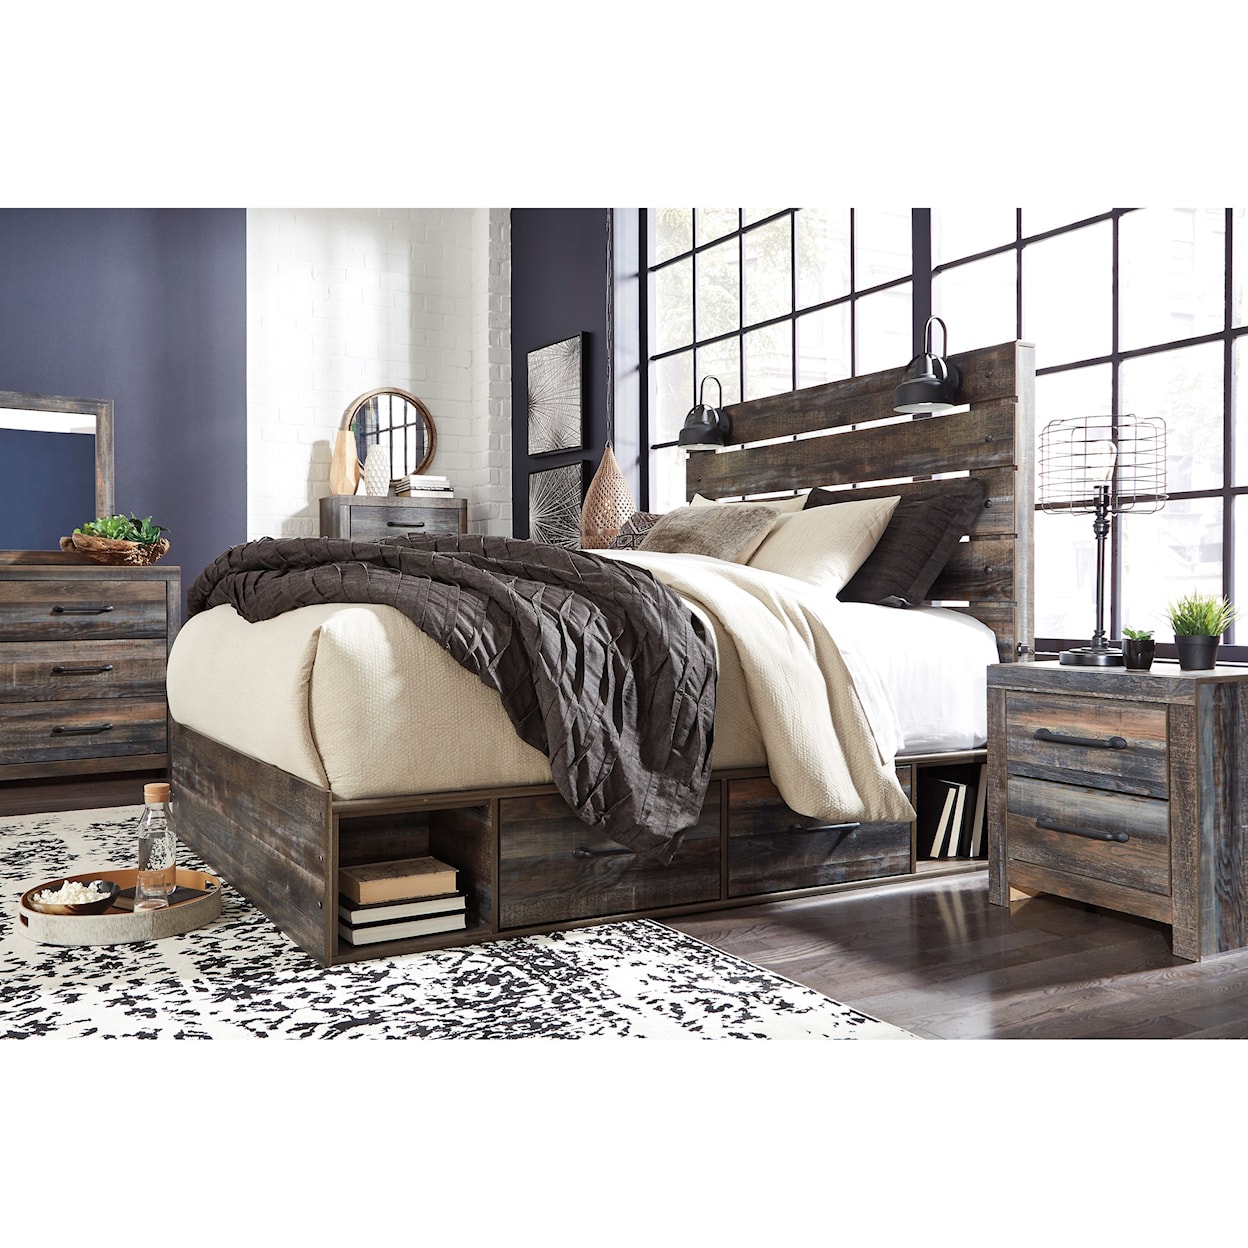 Ashley Furniture Signature Design Drystan King Storage Bed with 4 Drawers